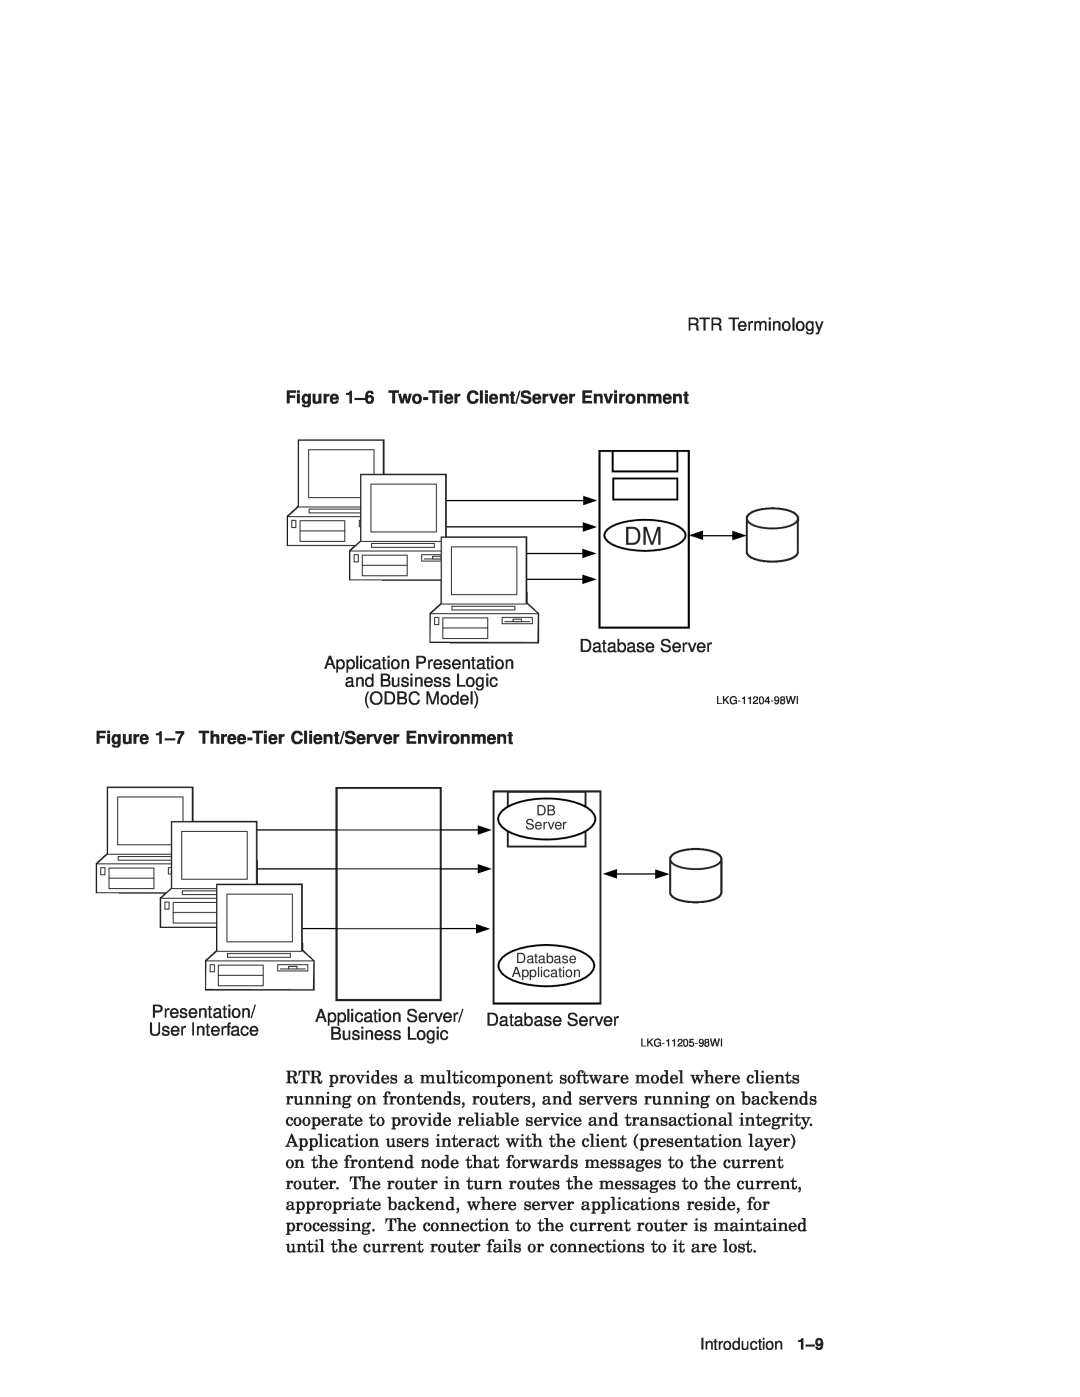 Compaq Reliable Transaction Router manual 6 Two-Tier Client/Server Environment, 7 Three-Tier Client/Server Environment 